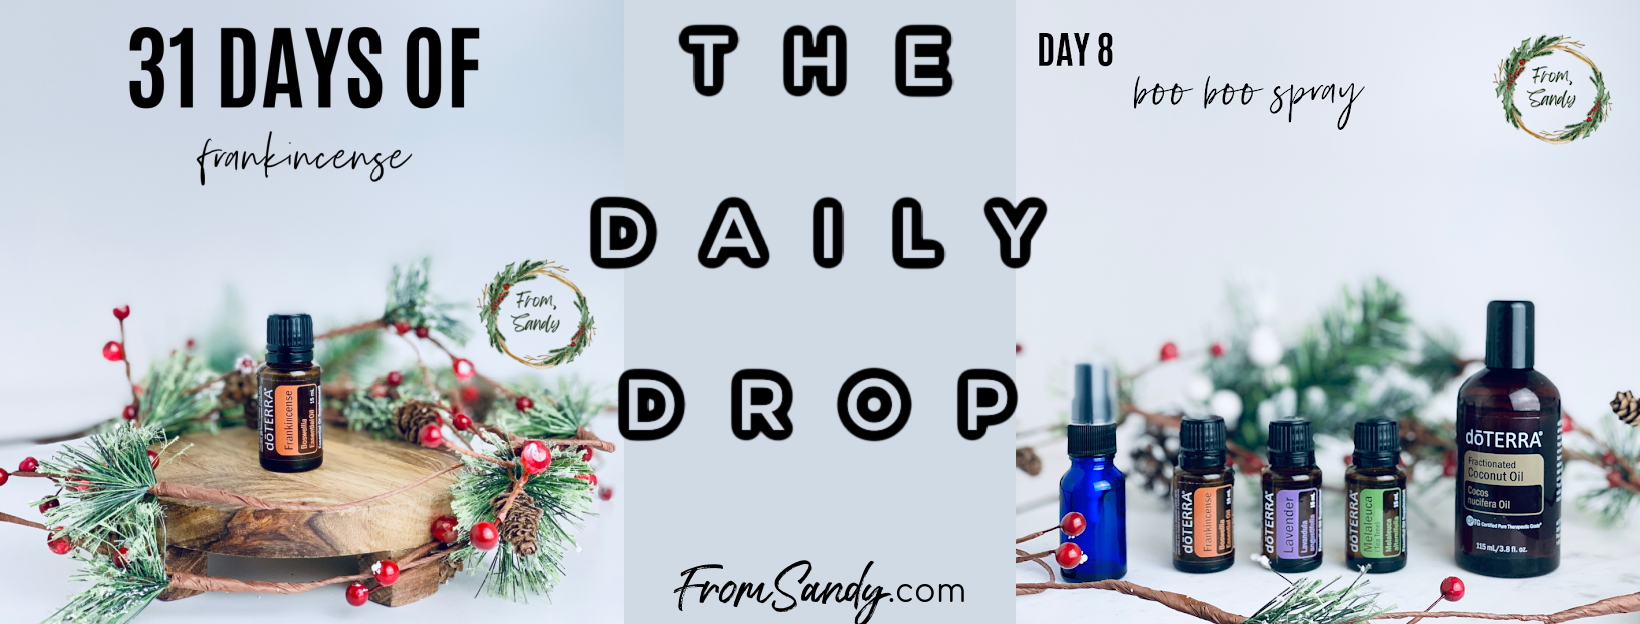 Boo Boo Spray (31 Days of Frankincense: Day 8), From Sandy